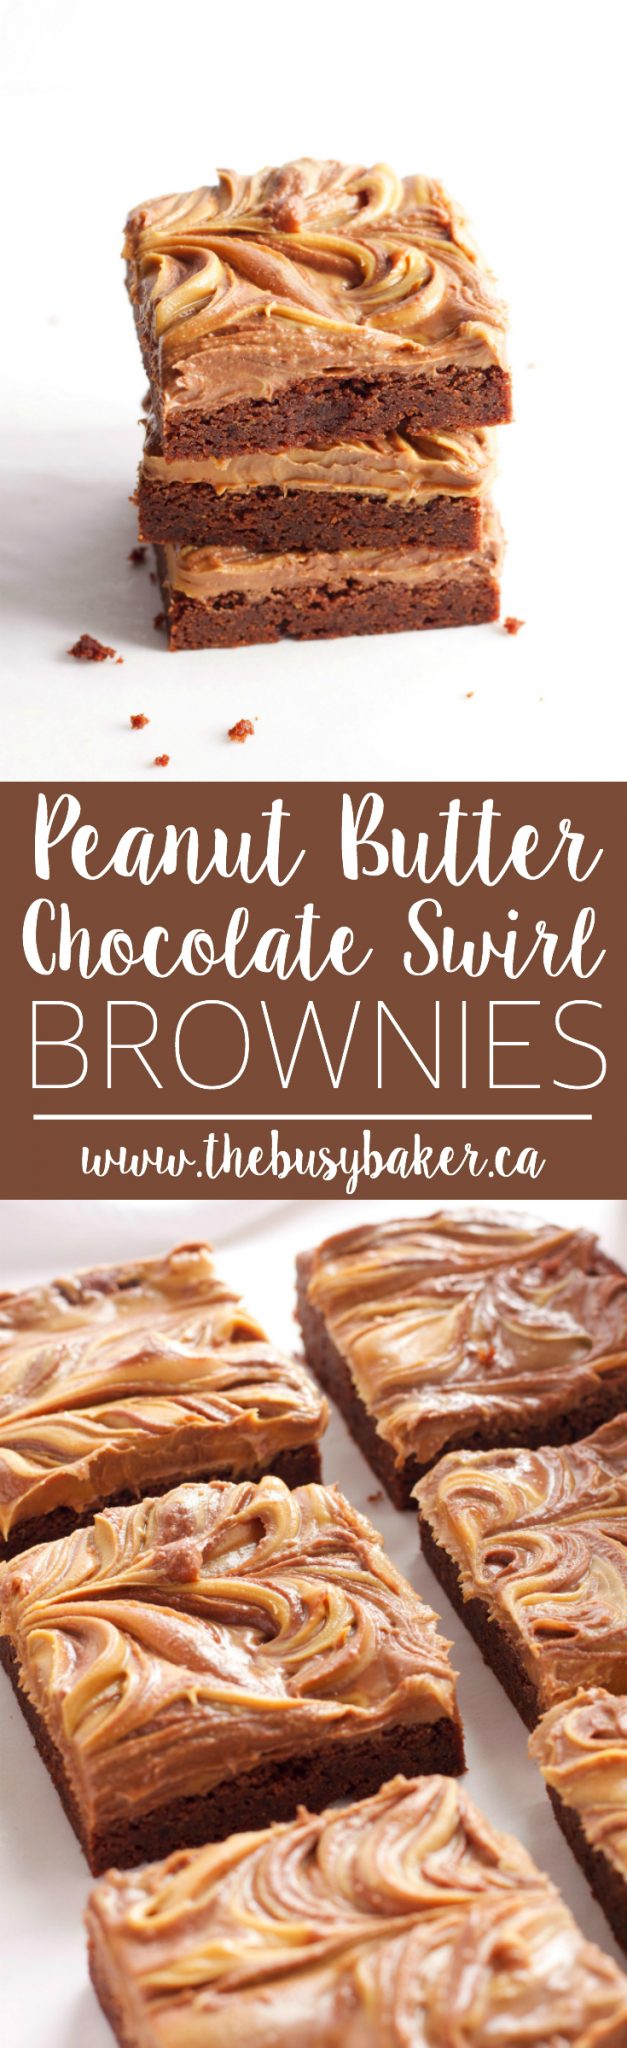 These Peanut Butter Chocolate Swirl Brownies are the perfect sweet treat for peanut butter chocolate lovers! And so easy to make! Recipe from thebusybaker.ca! via @busybakerblog